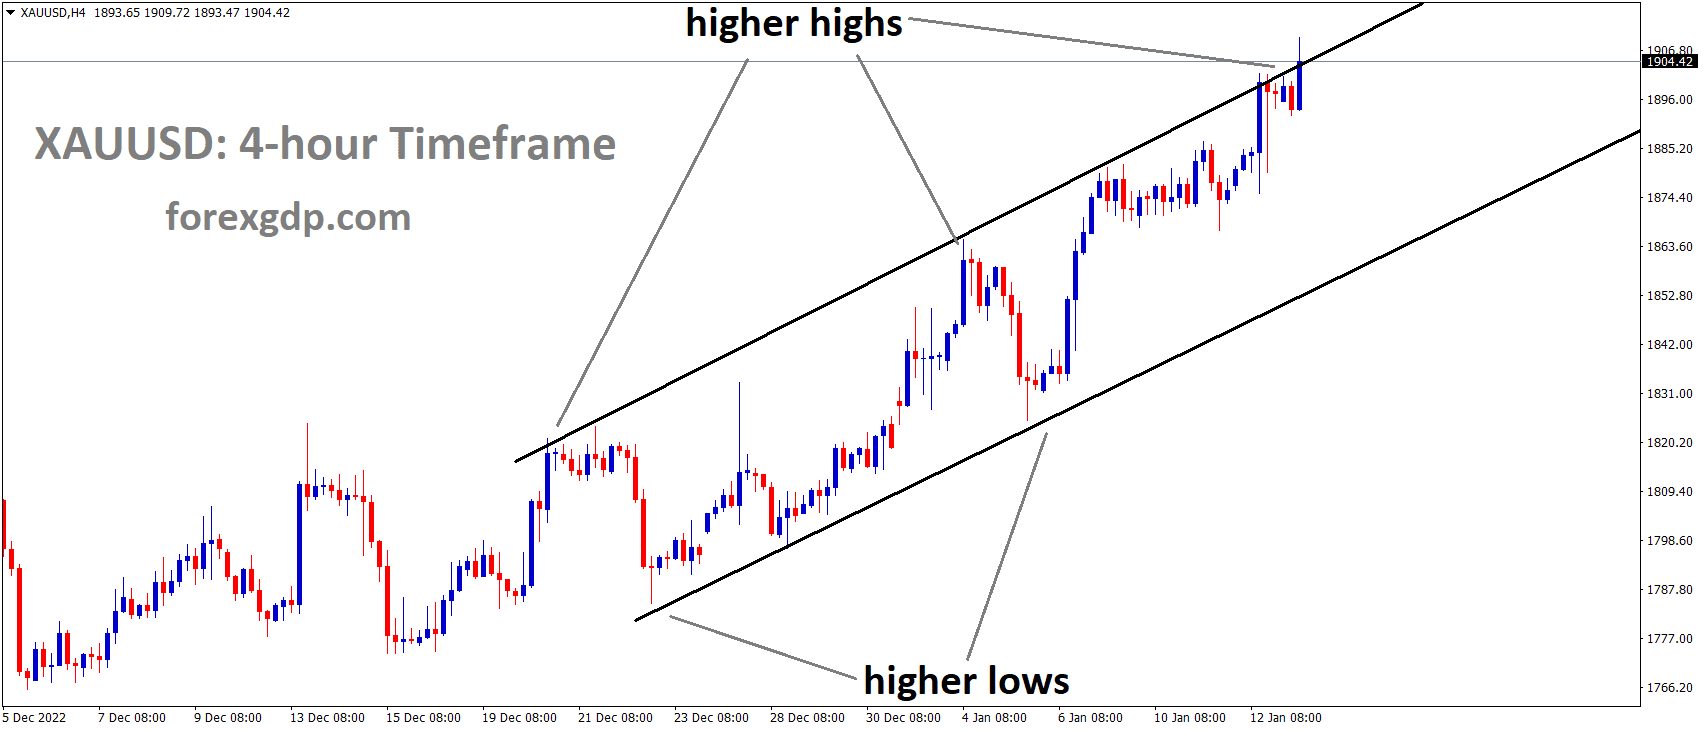 XAUUSD Gold price is moving in an Ascending channel and the market has reached the higher high area of the channel 2